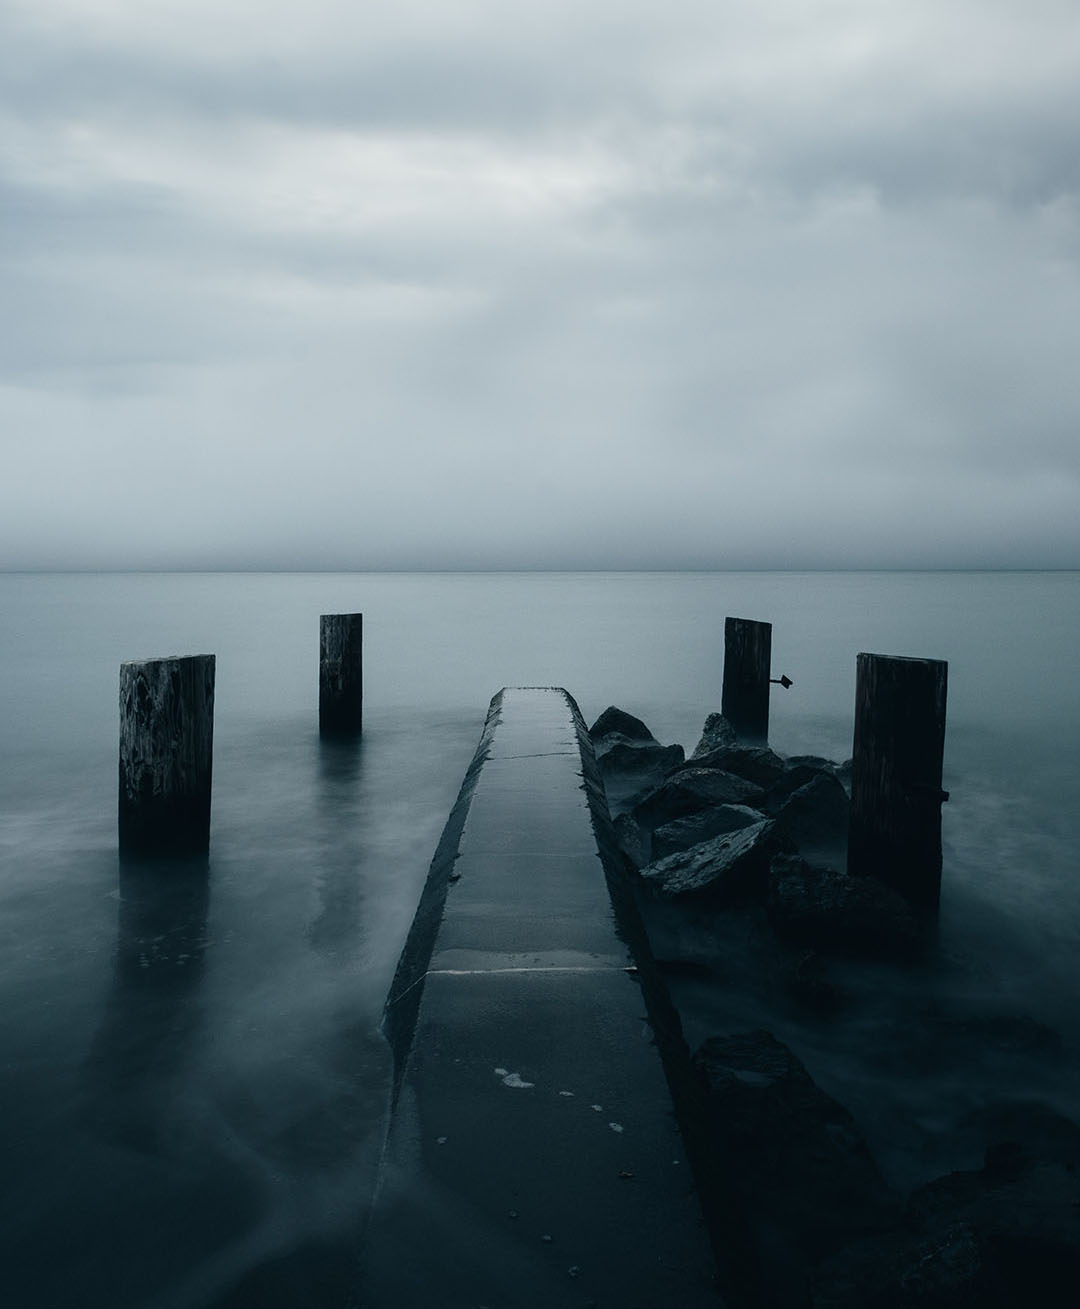 Jetty across misty waters on a cloudy day